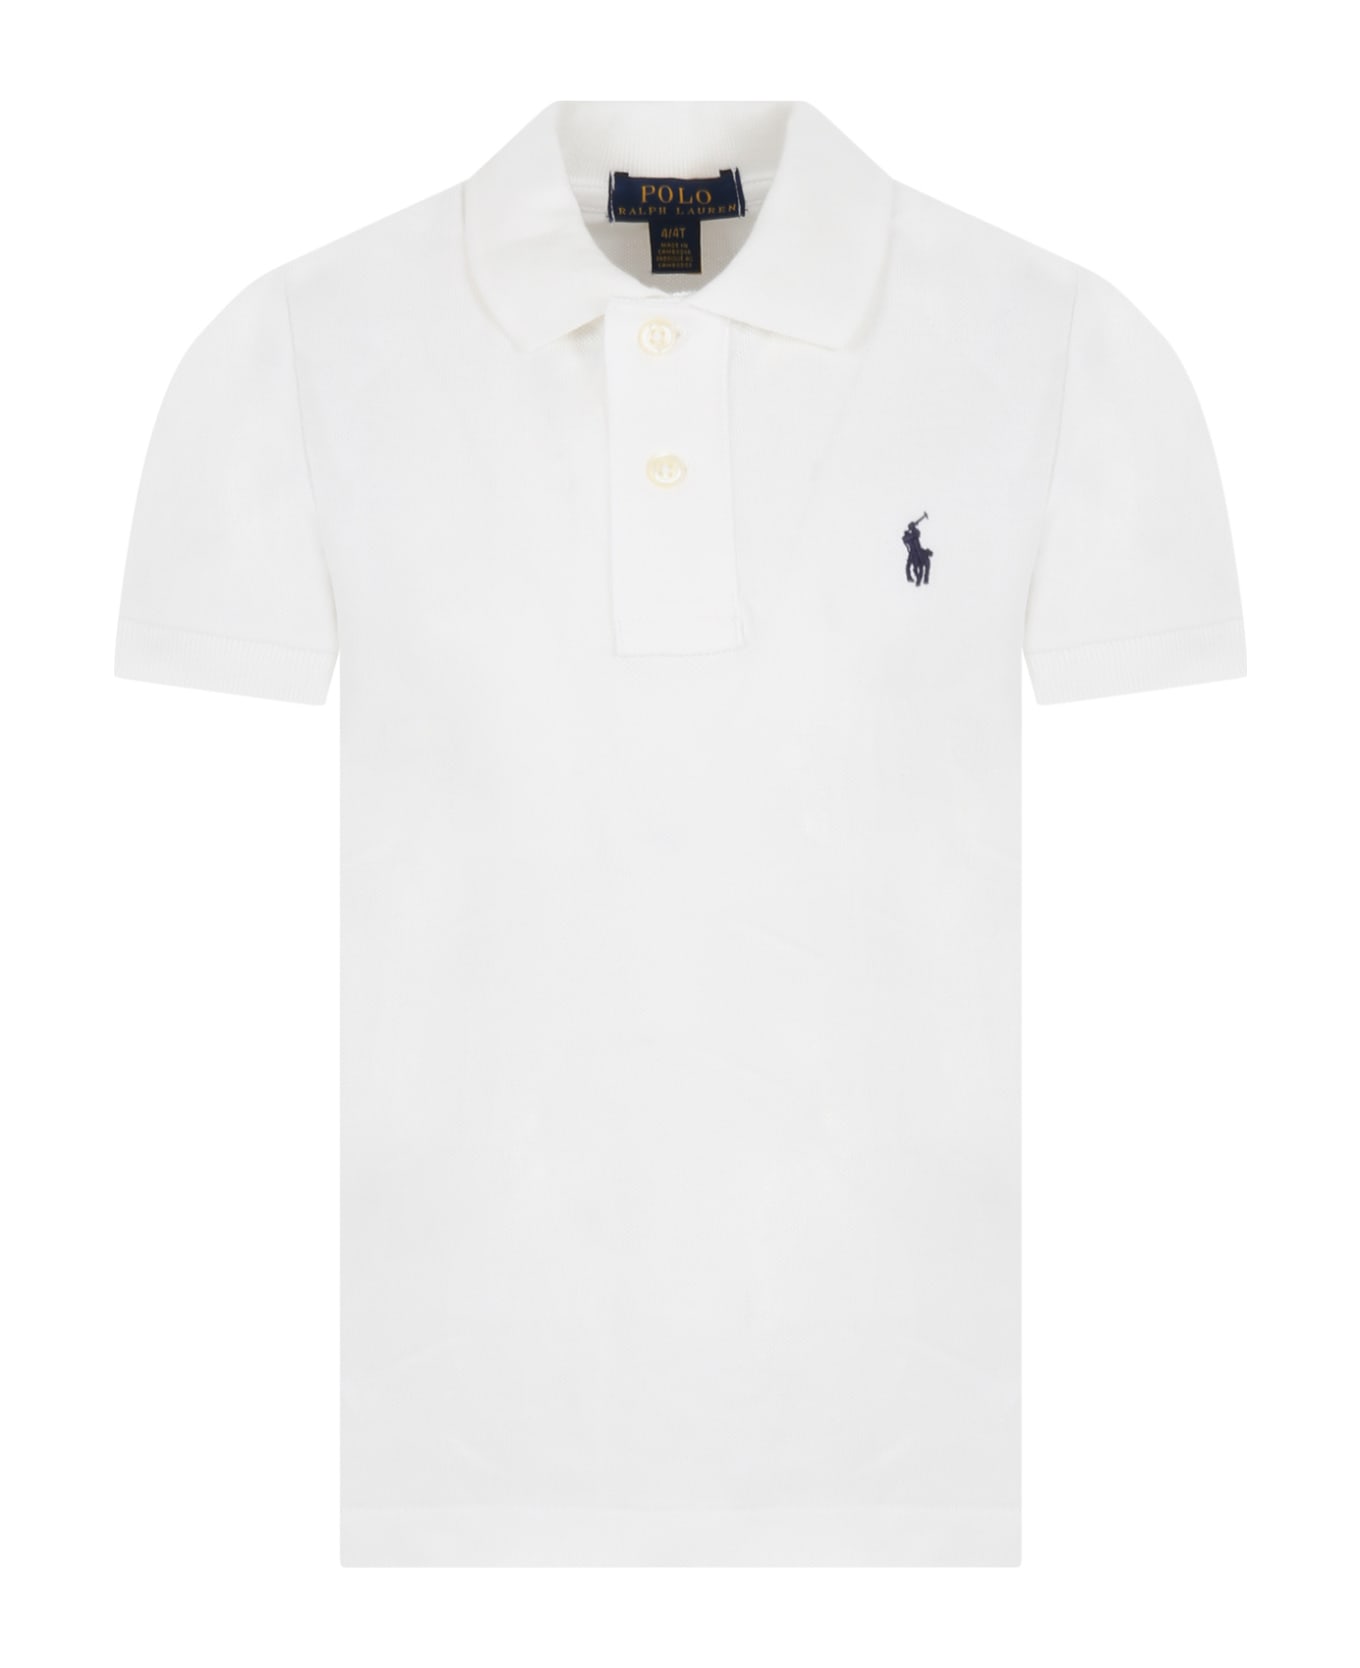 Ralph Lauren White Polo Shirt For Boy With Pony Logo - White Tシャツ＆ポロシャツ